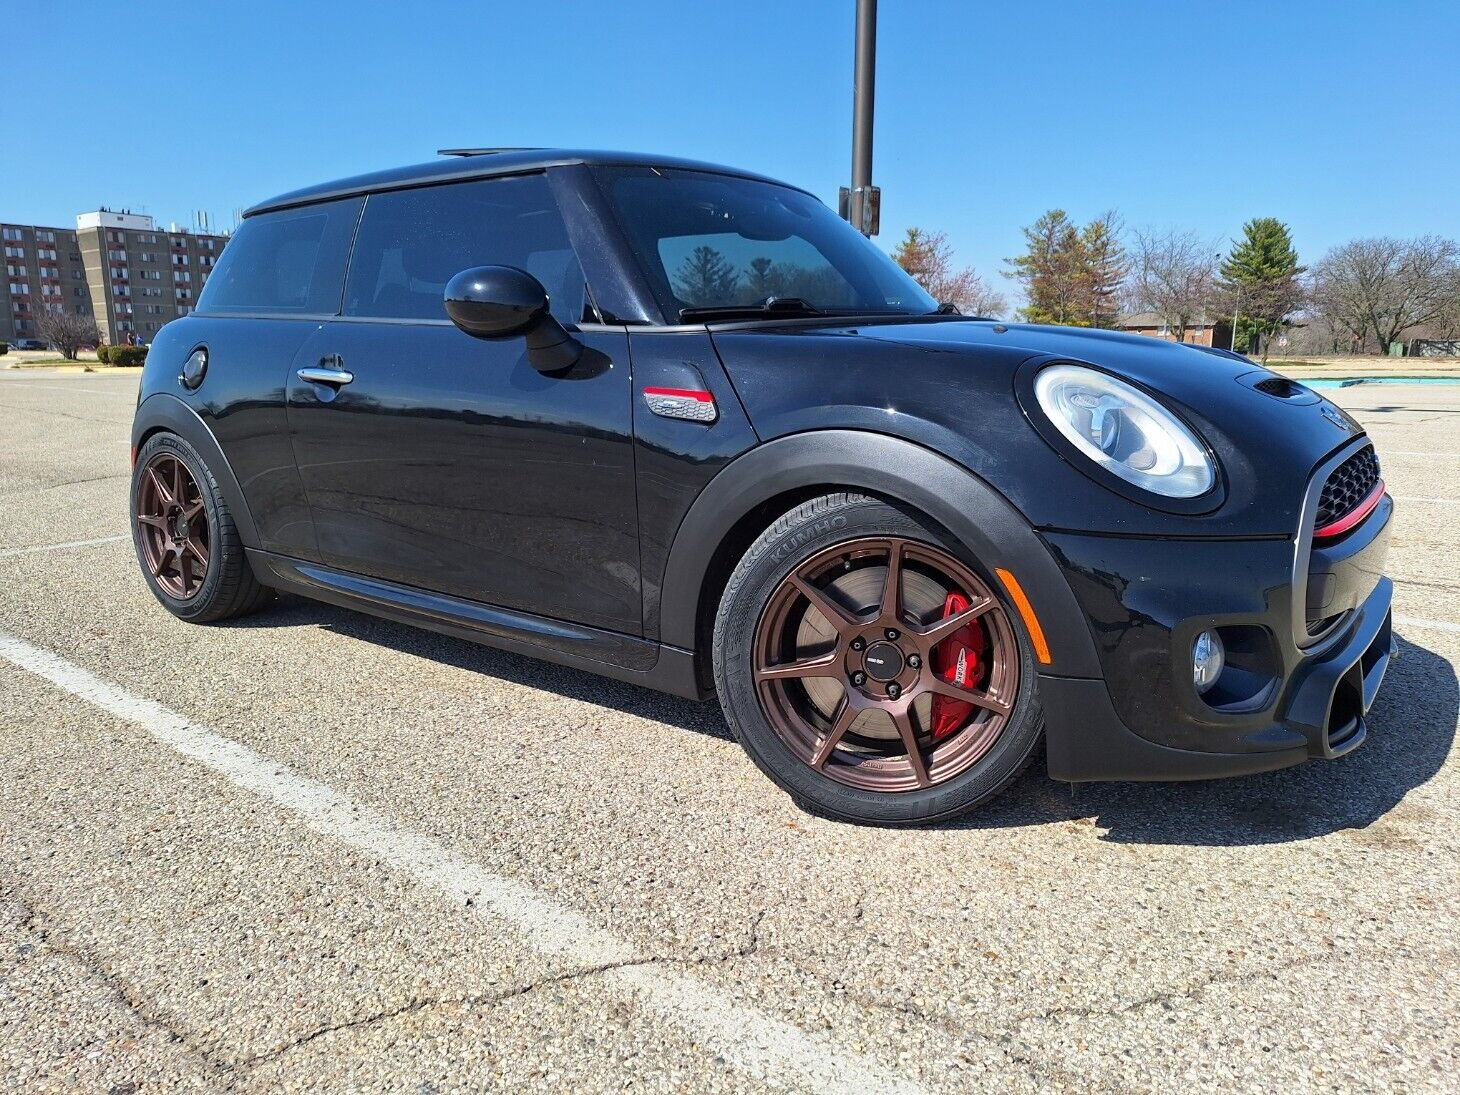 2015 Mini cooper S basically upgraded slowly to a JCW